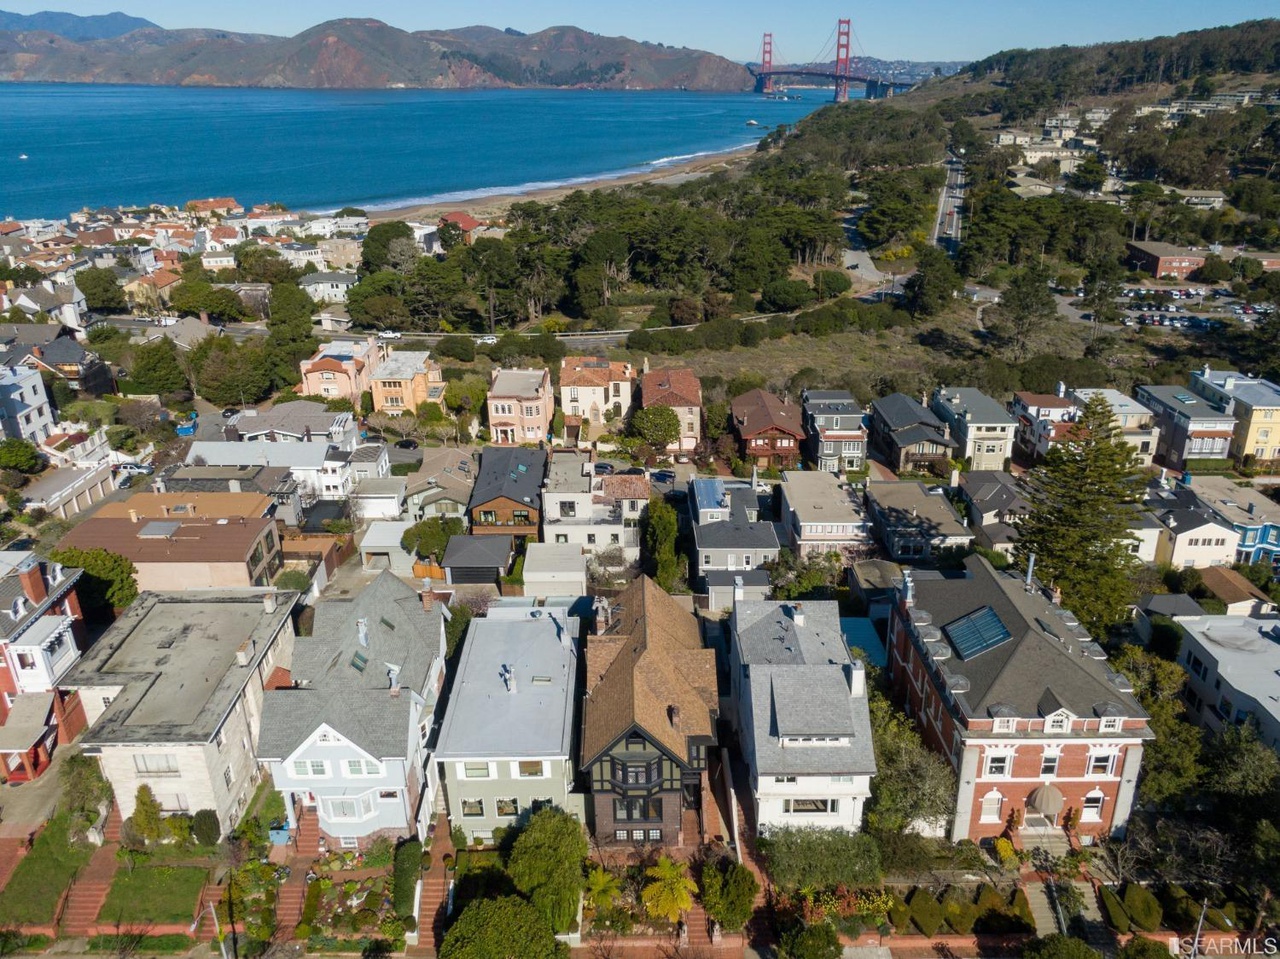 Property Photo: Aerial view of 2212 Lake Street, showing the close proximity to the Presidio and San Francisco Bay